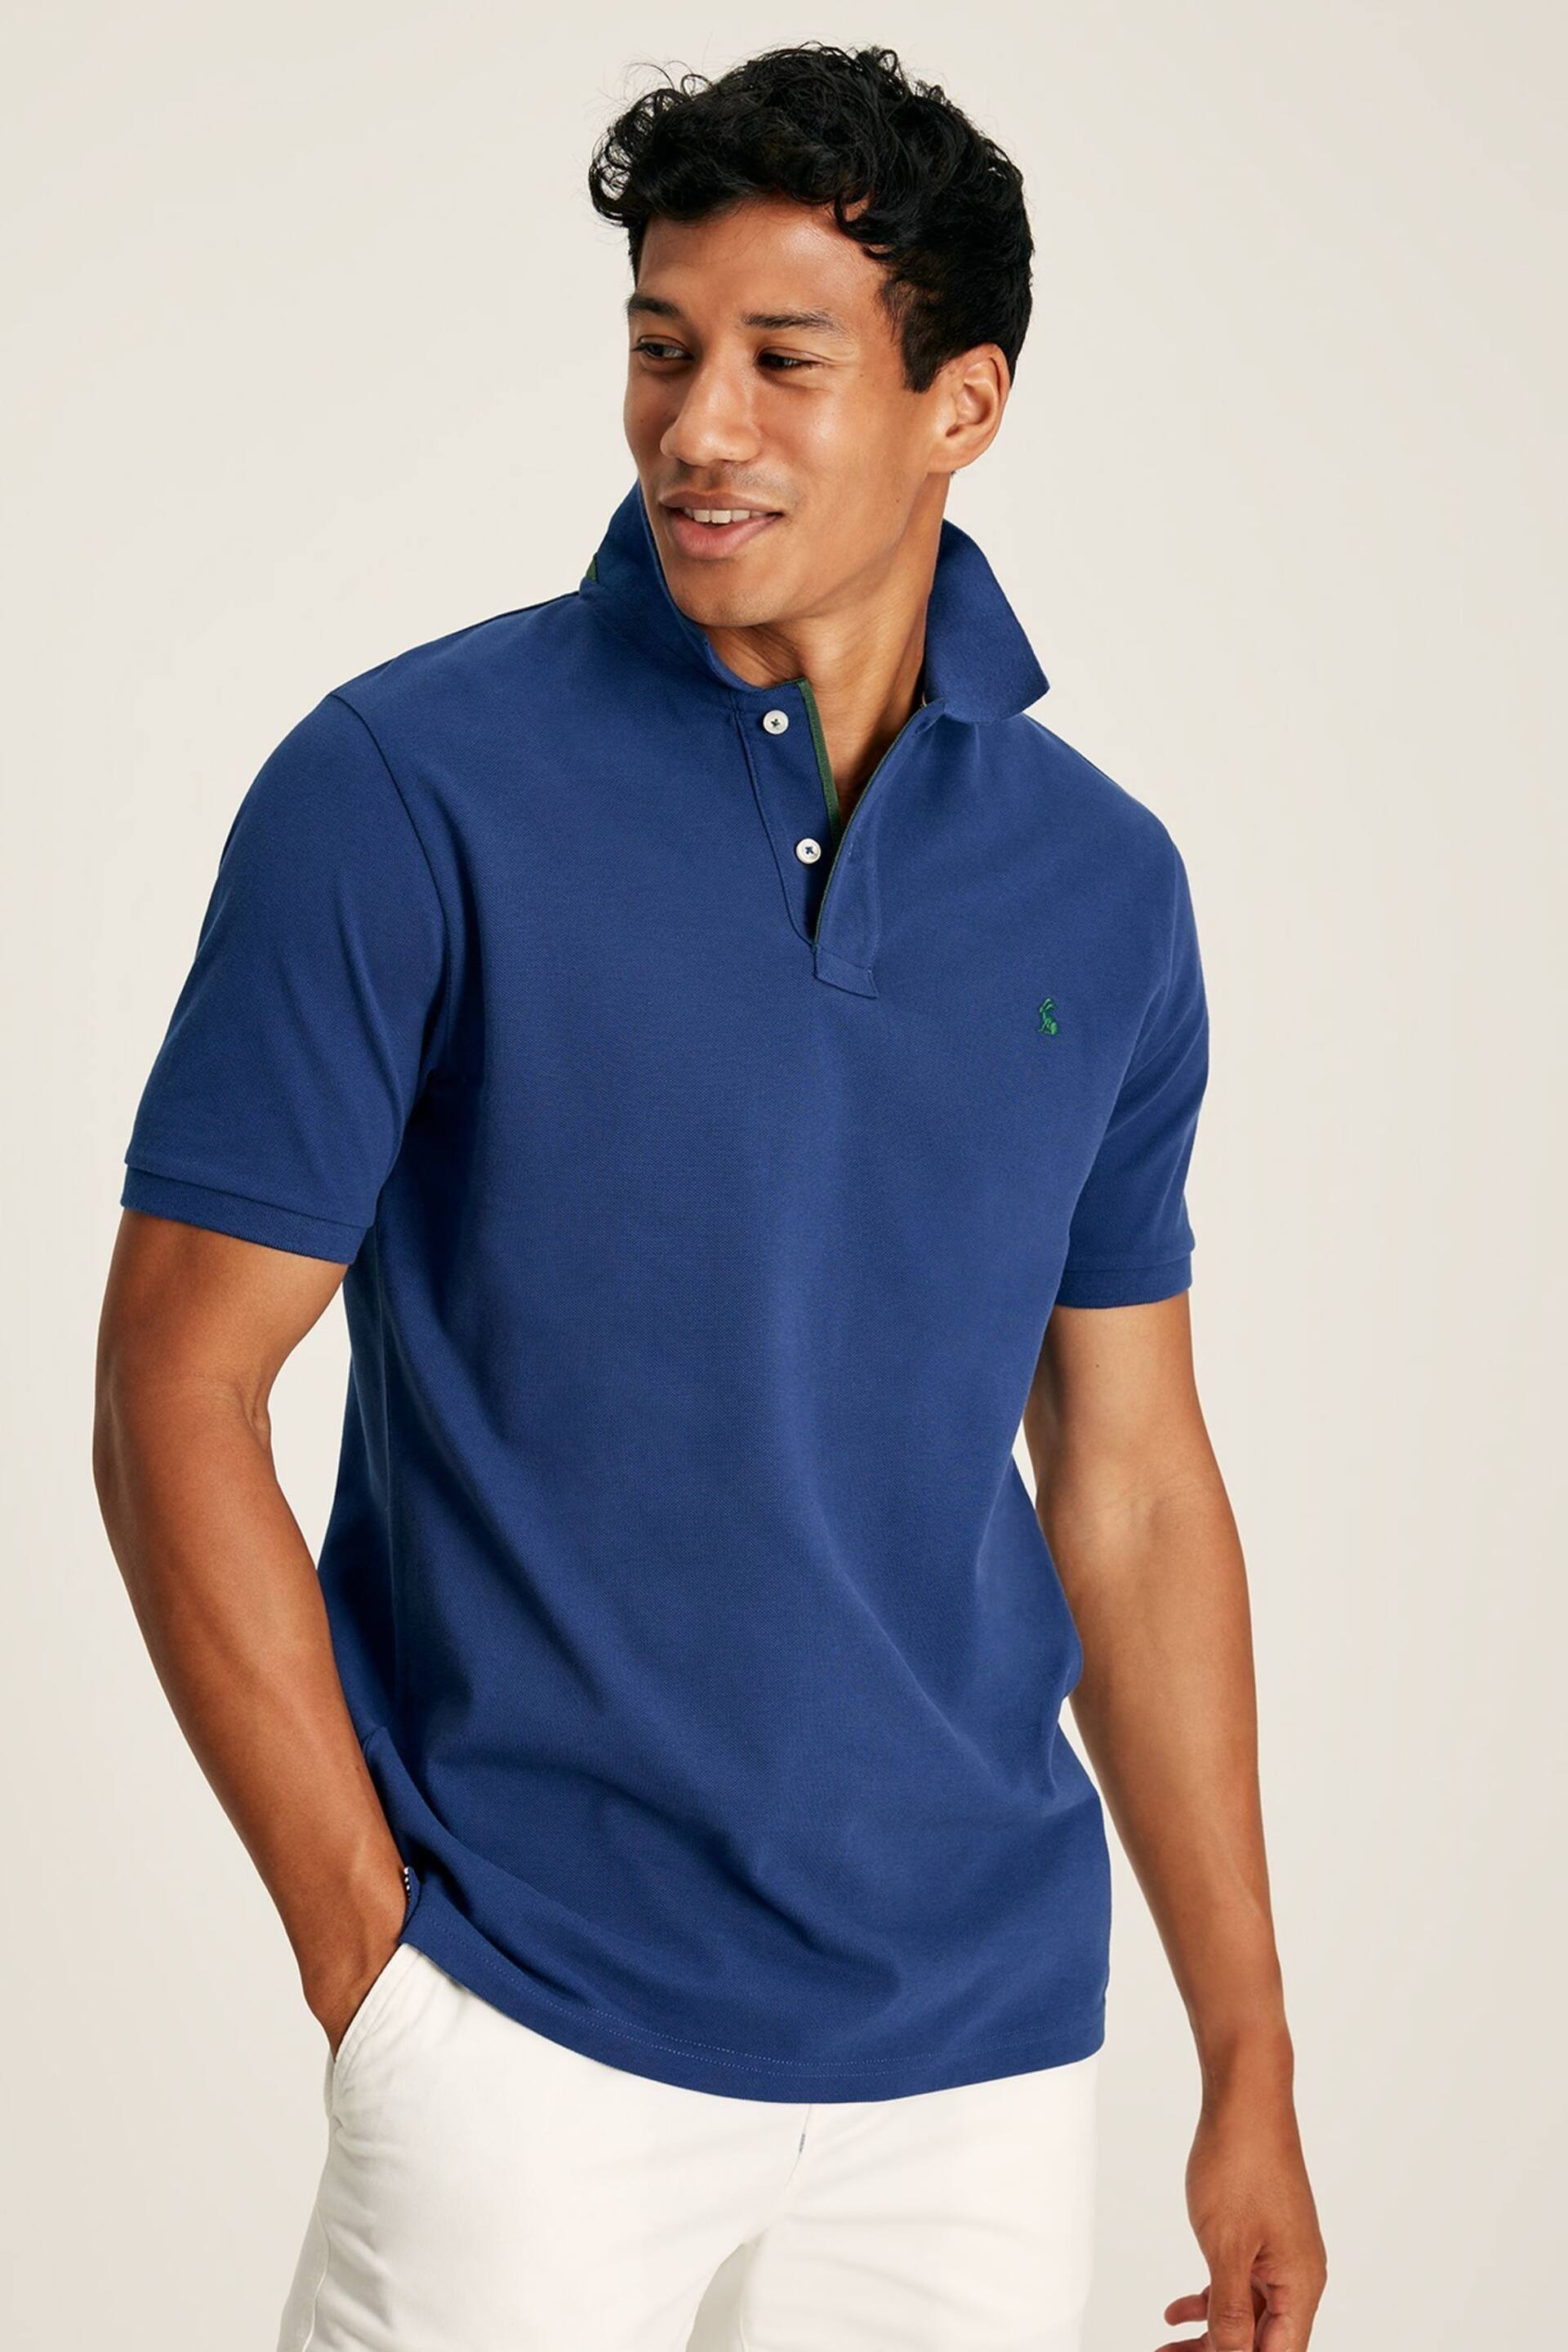 Joules Woody Blue Cotton Polo Shirt - Image 1 of 5